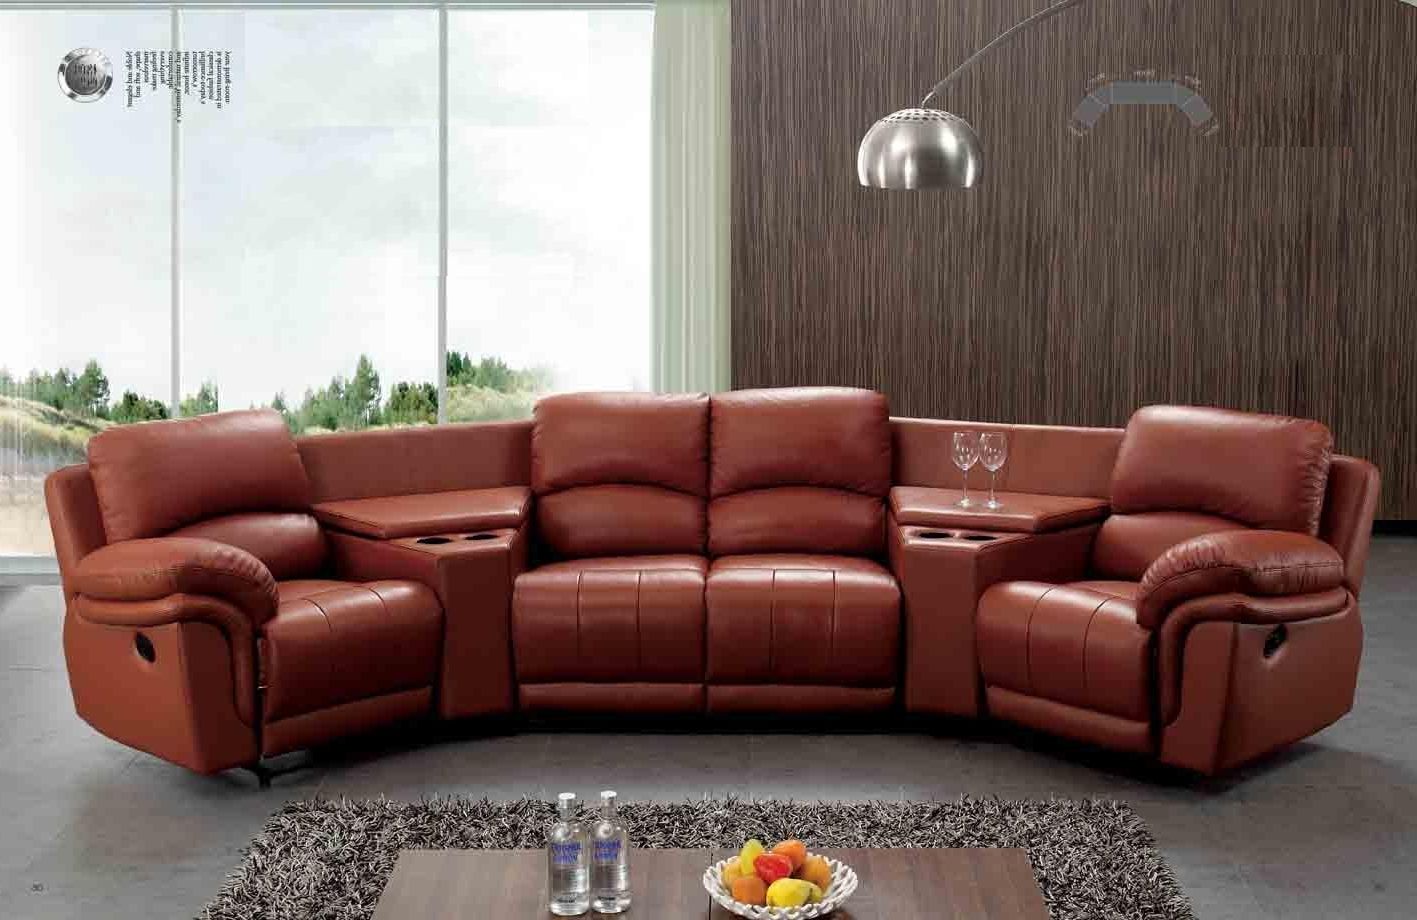 Sofa : Really Cool Desk Chairs Single Bed Chair Sleeper Sectional For Most Current Sectional Sofas With Electric Recliners (View 4 of 15)